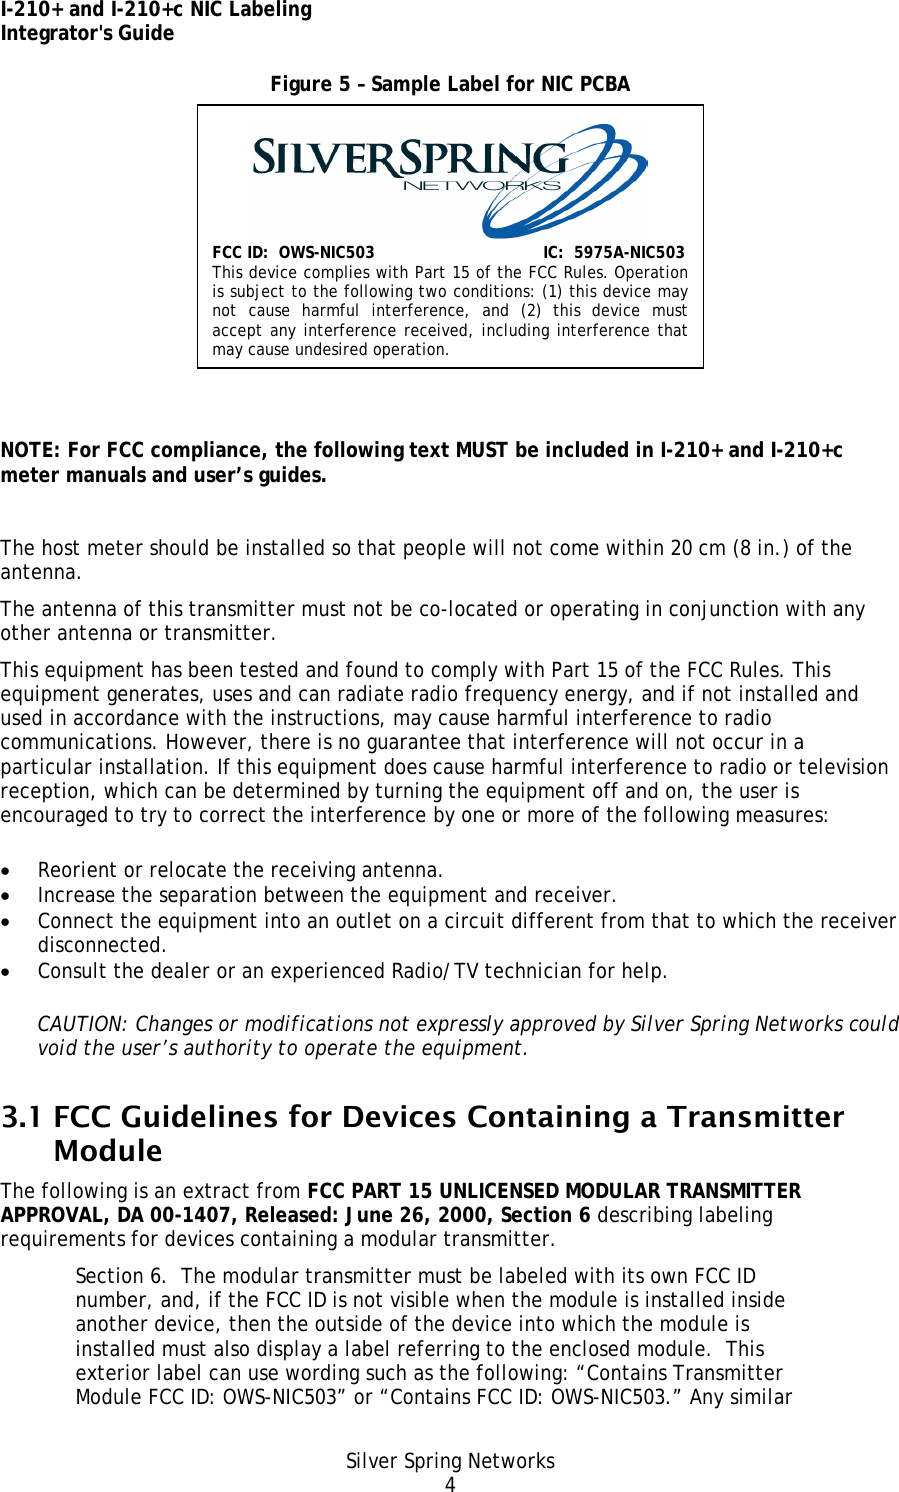 I-210+ and I-210+c NIC Labeling Integrator&apos;s Guide Silver Spring Networks 4 Figure 5 – Sample Label for NIC PCBA    NOTE: For FCC compliance, the following text MUST be included in I-210+ and I-210+c meter manuals and user’s guides.  The host meter should be installed so that people will not come within 20 cm (8 in.) of the antenna. The antenna of this transmitter must not be co-located or operating in conjunction with any other antenna or transmitter. This equipment has been tested and found to comply with Part 15 of the FCC Rules. This equipment generates, uses and can radiate radio frequency energy, and if not installed and used in accordance with the instructions, may cause harmful interference to radio communications. However, there is no guarantee that interference will not occur in a particular installation. If this equipment does cause harmful interference to radio or television reception, which can be determined by turning the equipment off and on, the user is encouraged to try to correct the interference by one or more of the following measures: • Reorient or relocate the receiving antenna. • Increase the separation between the equipment and receiver. • Connect the equipment into an outlet on a circuit different from that to which the receiver disconnected. • Consult the dealer or an experienced Radio/TV technician for help. CAUTION: Changes or modifications not expressly approved by Silver Spring Networks could void the user’s authority to operate the equipment. 3.1 FCC Guidelines for Devices Containing a Transmitter Module The following is an extract from FCC PART 15 UNLICENSED MODULAR TRANSMITTER APPROVAL, DA 00-1407, Released: June 26, 2000, Section 6 describing labeling requirements for devices containing a modular transmitter. Section 6.  The modular transmitter must be labeled with its own FCC ID number, and, if the FCC ID is not visible when the module is installed inside another device, then the outside of the device into which the module is installed must also display a label referring to the enclosed module.  This exterior label can use wording such as the following: “Contains Transmitter Module FCC ID: OWS-NIC503” or “Contains FCC ID: OWS-NIC503.” Any similar FCC ID:  OWS-NIC503IC:  5975A-NIC503 This device complies with Part 15 of the FCC Rules. Operation is subject to the following two conditions: (1) this device may not cause harmful interference, and (2) this device must accept any interference received, including interference that may cause undesired operation. 